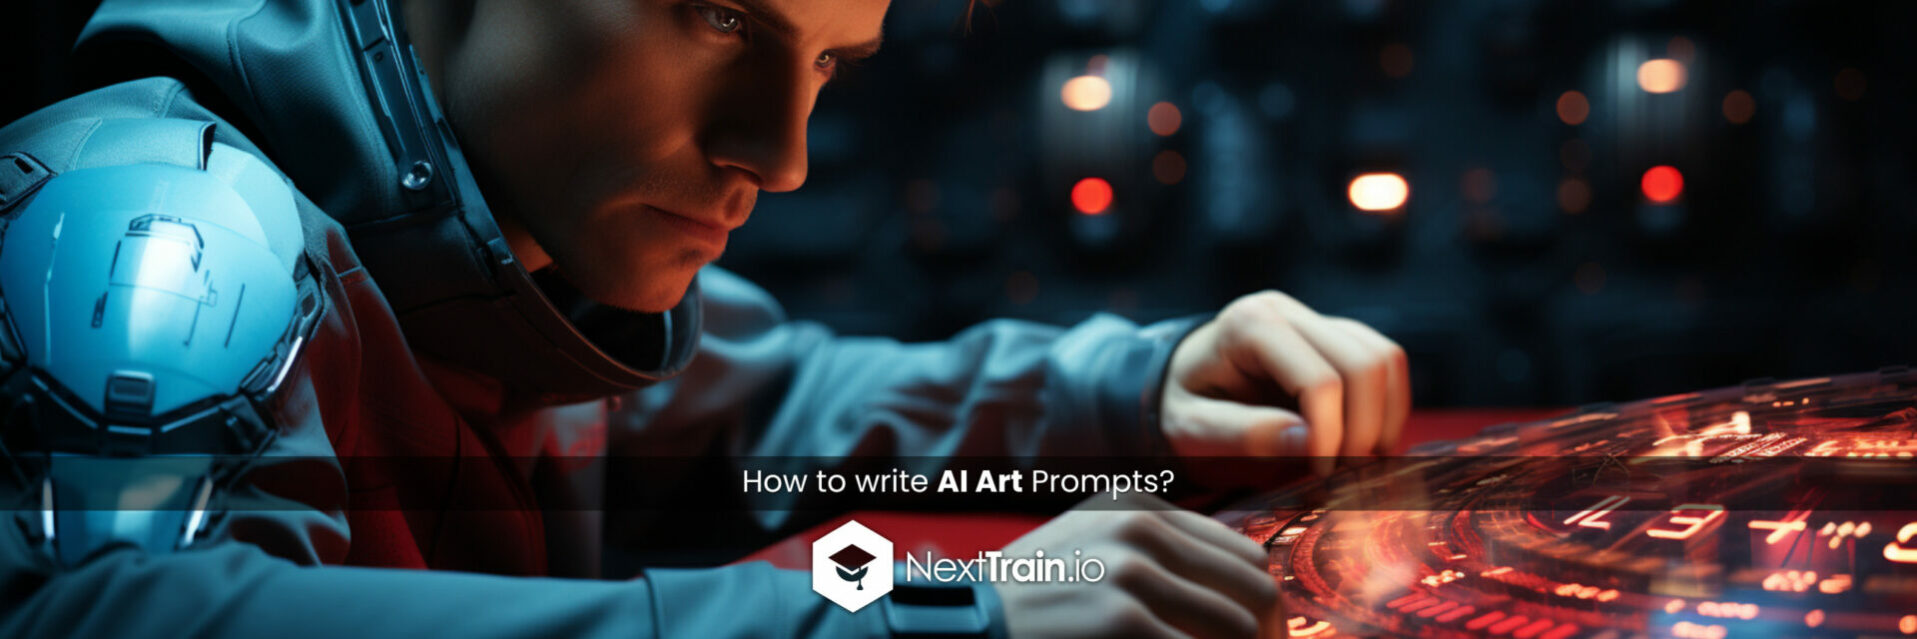 How to write AI Art Prompts?